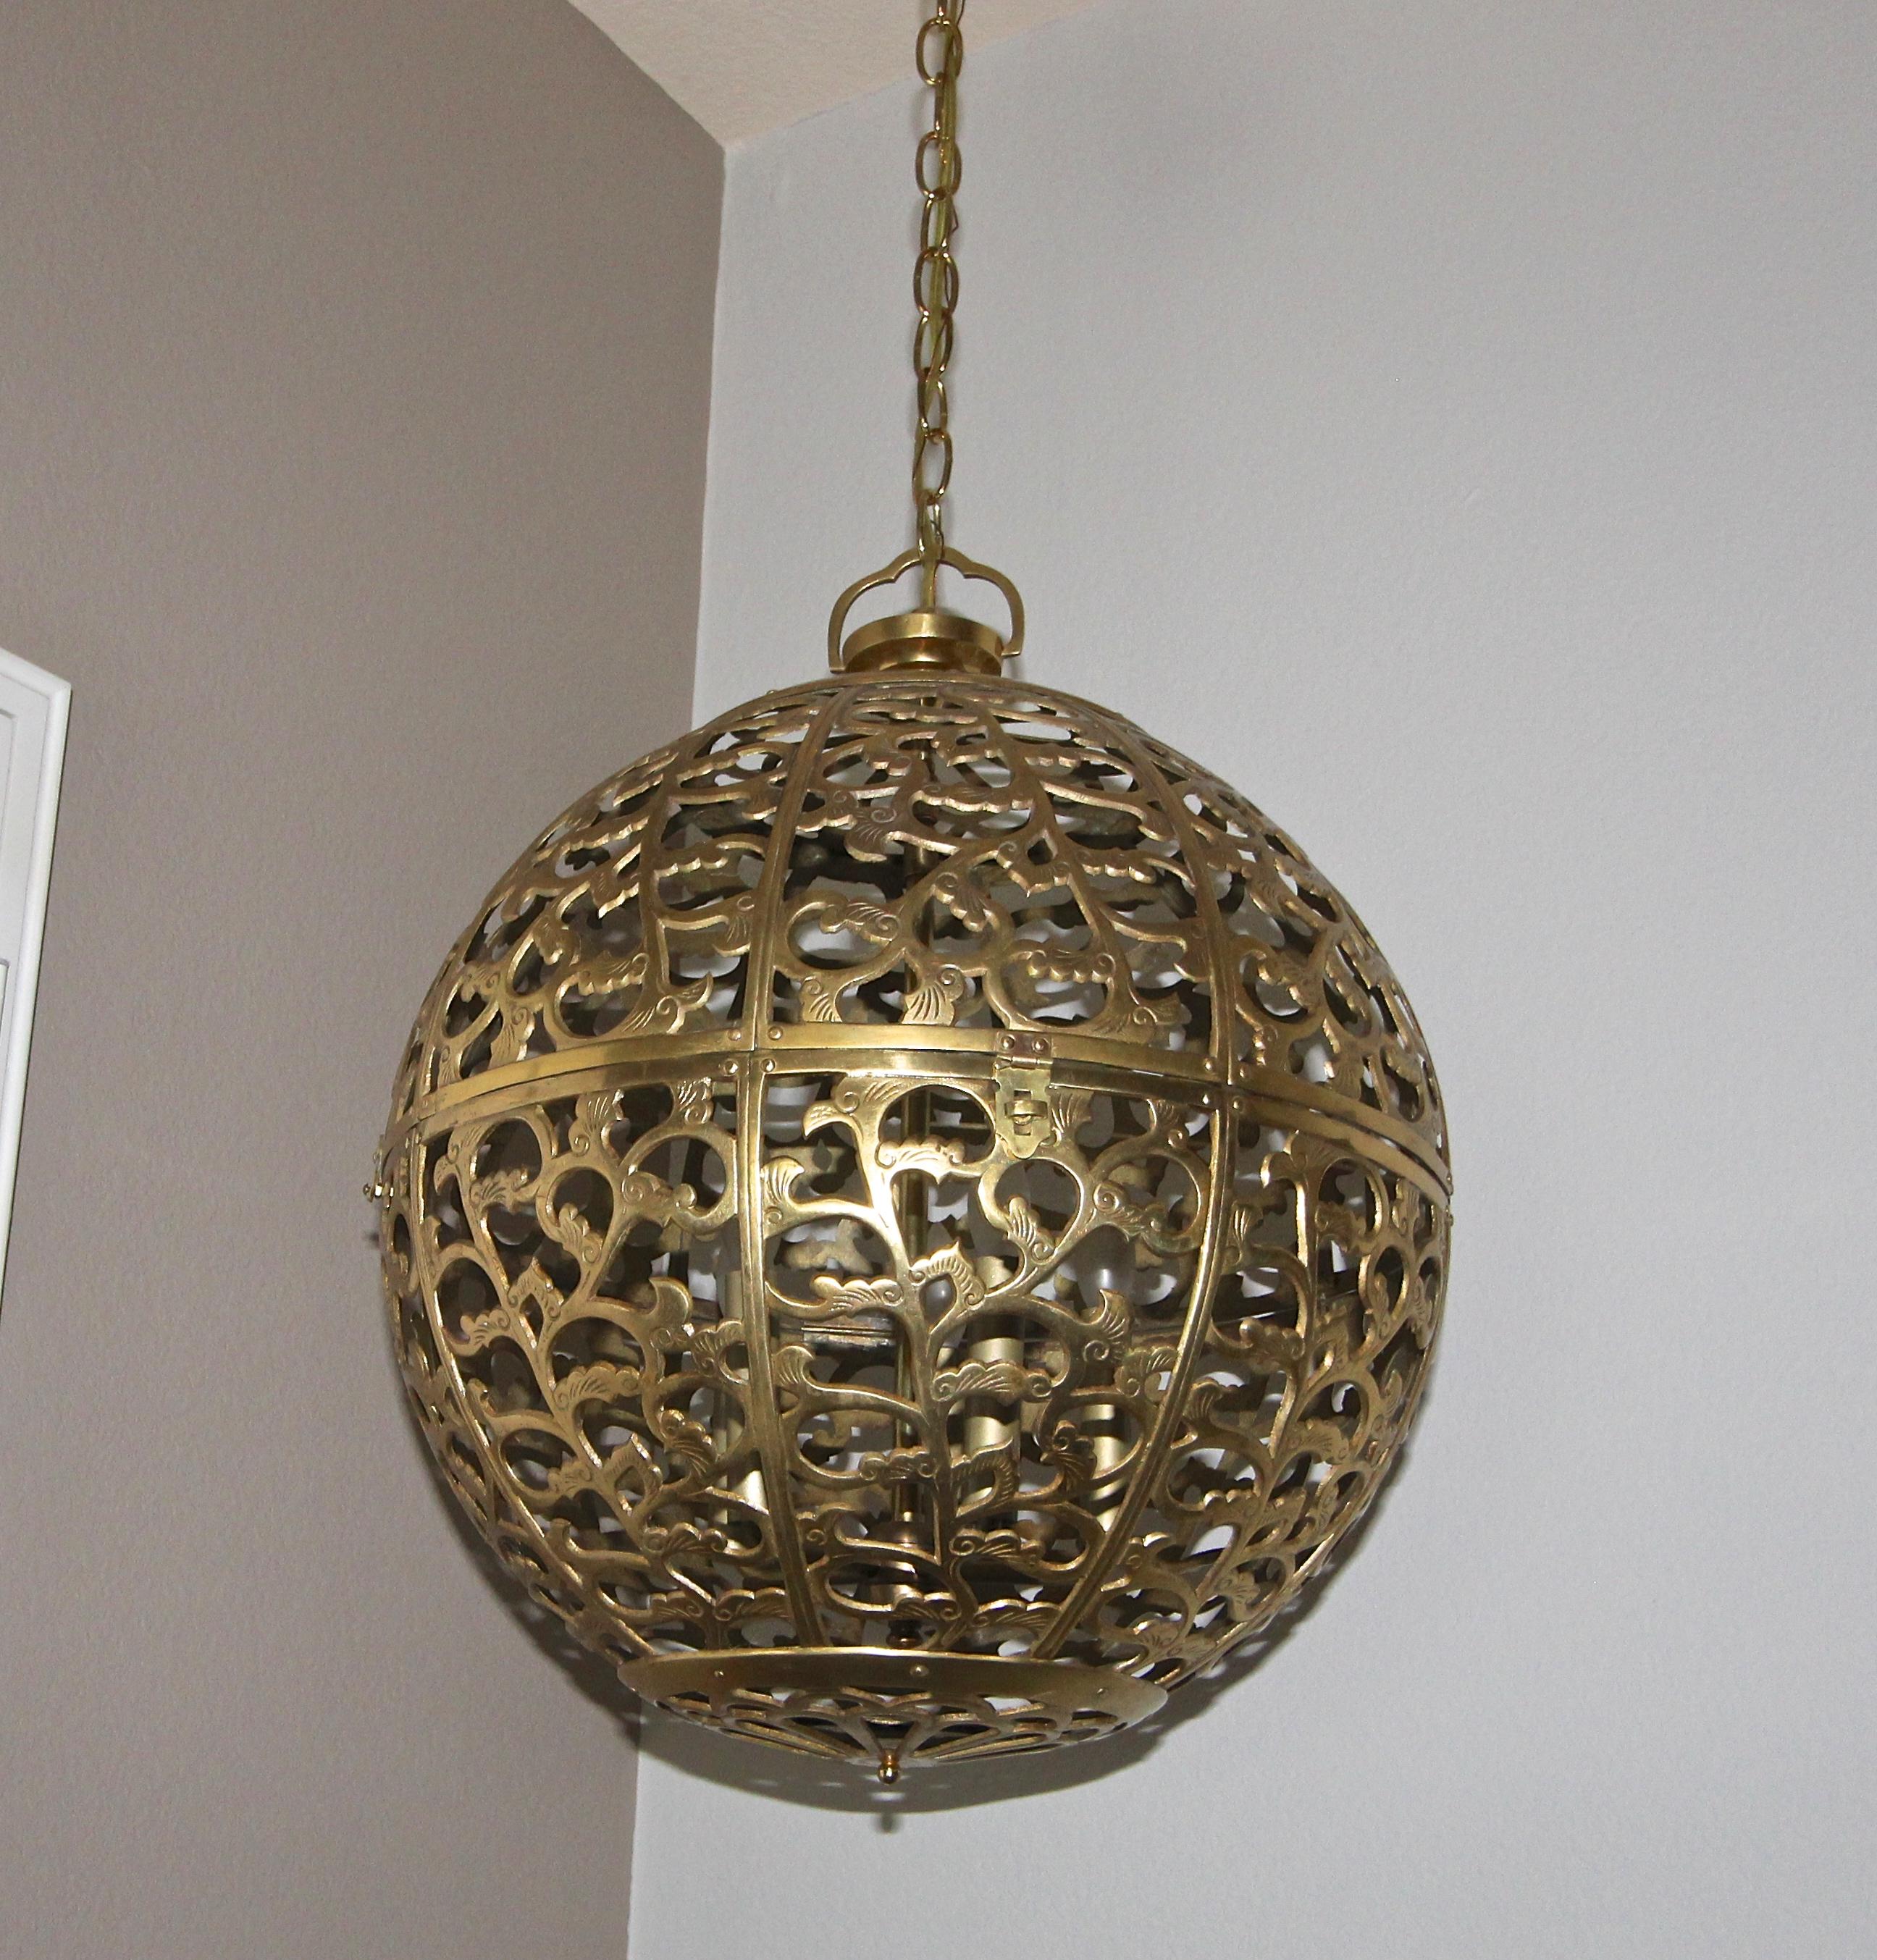 Huge brass pierced Asian chandelier or pendant light with scrolling arabesque pattern motif. Handcrafted from thick solid brass in Japan in the 1950s, this pendant has been refitted with a custom brass 5 light cluster for a more contemporary appeal.